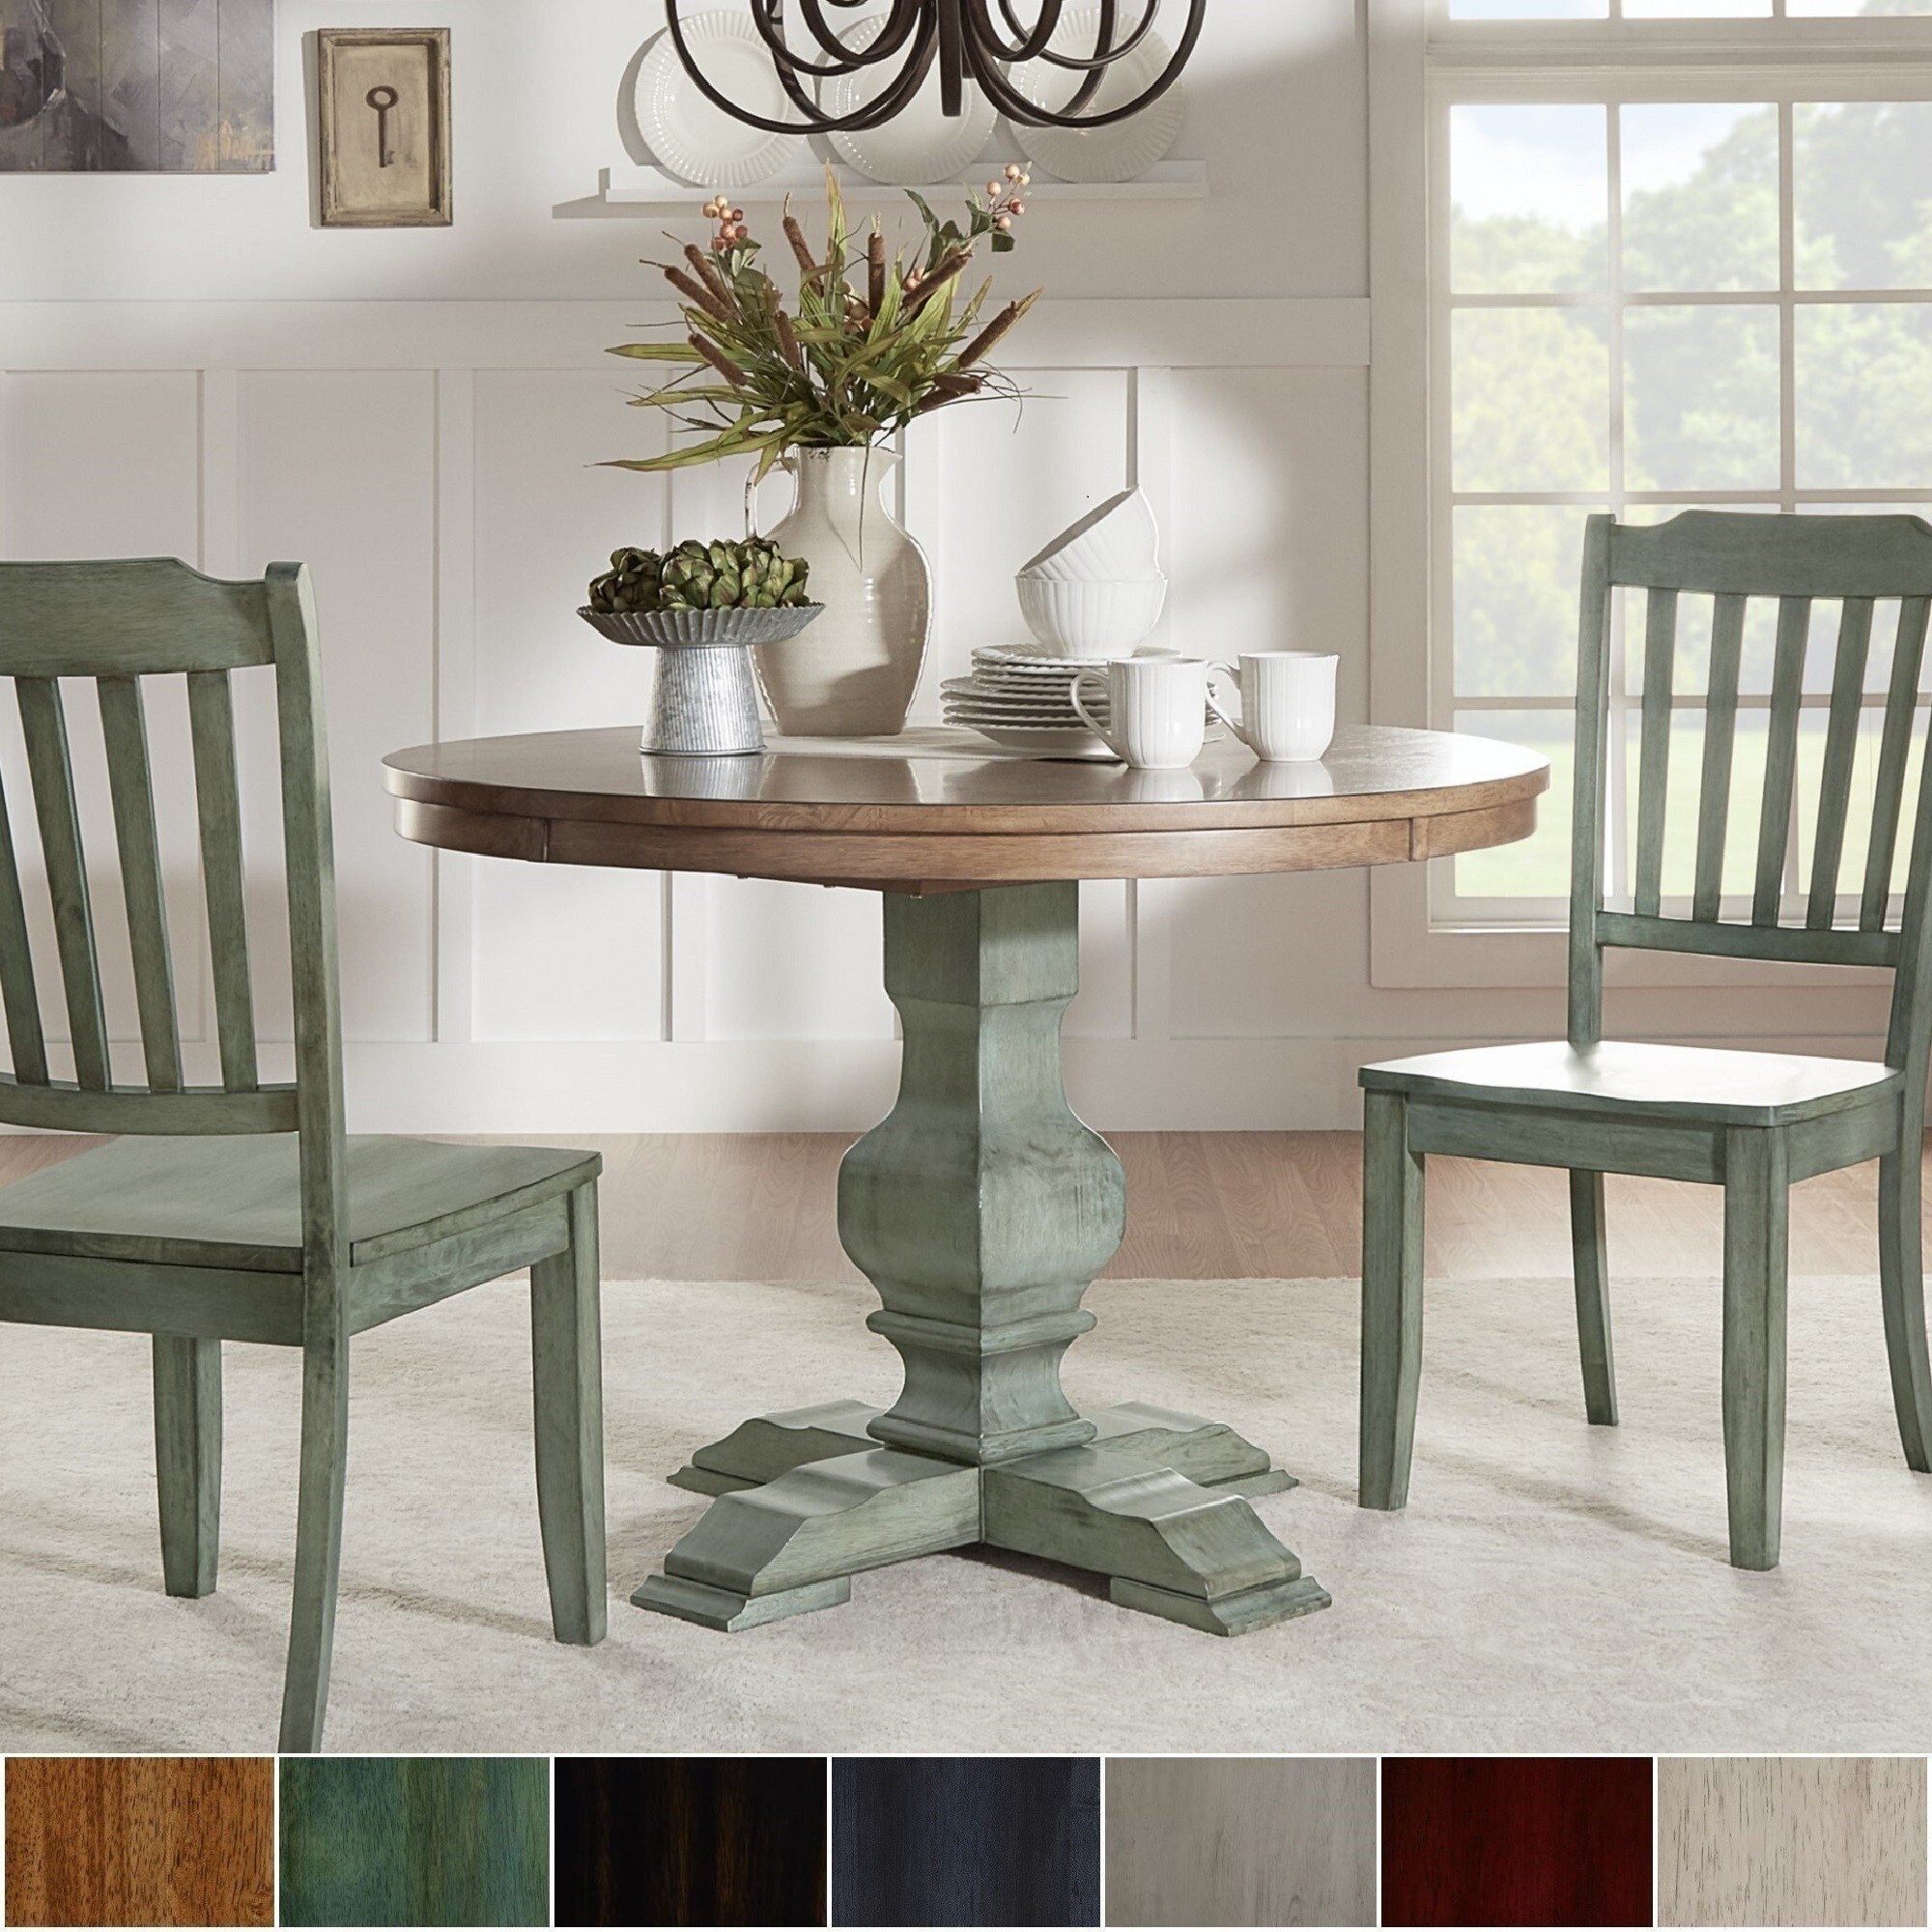 Eleanor Two Tone Round Solid Wood Top Dining Table By Inspire Q Classic On Sale Overstock 13476327